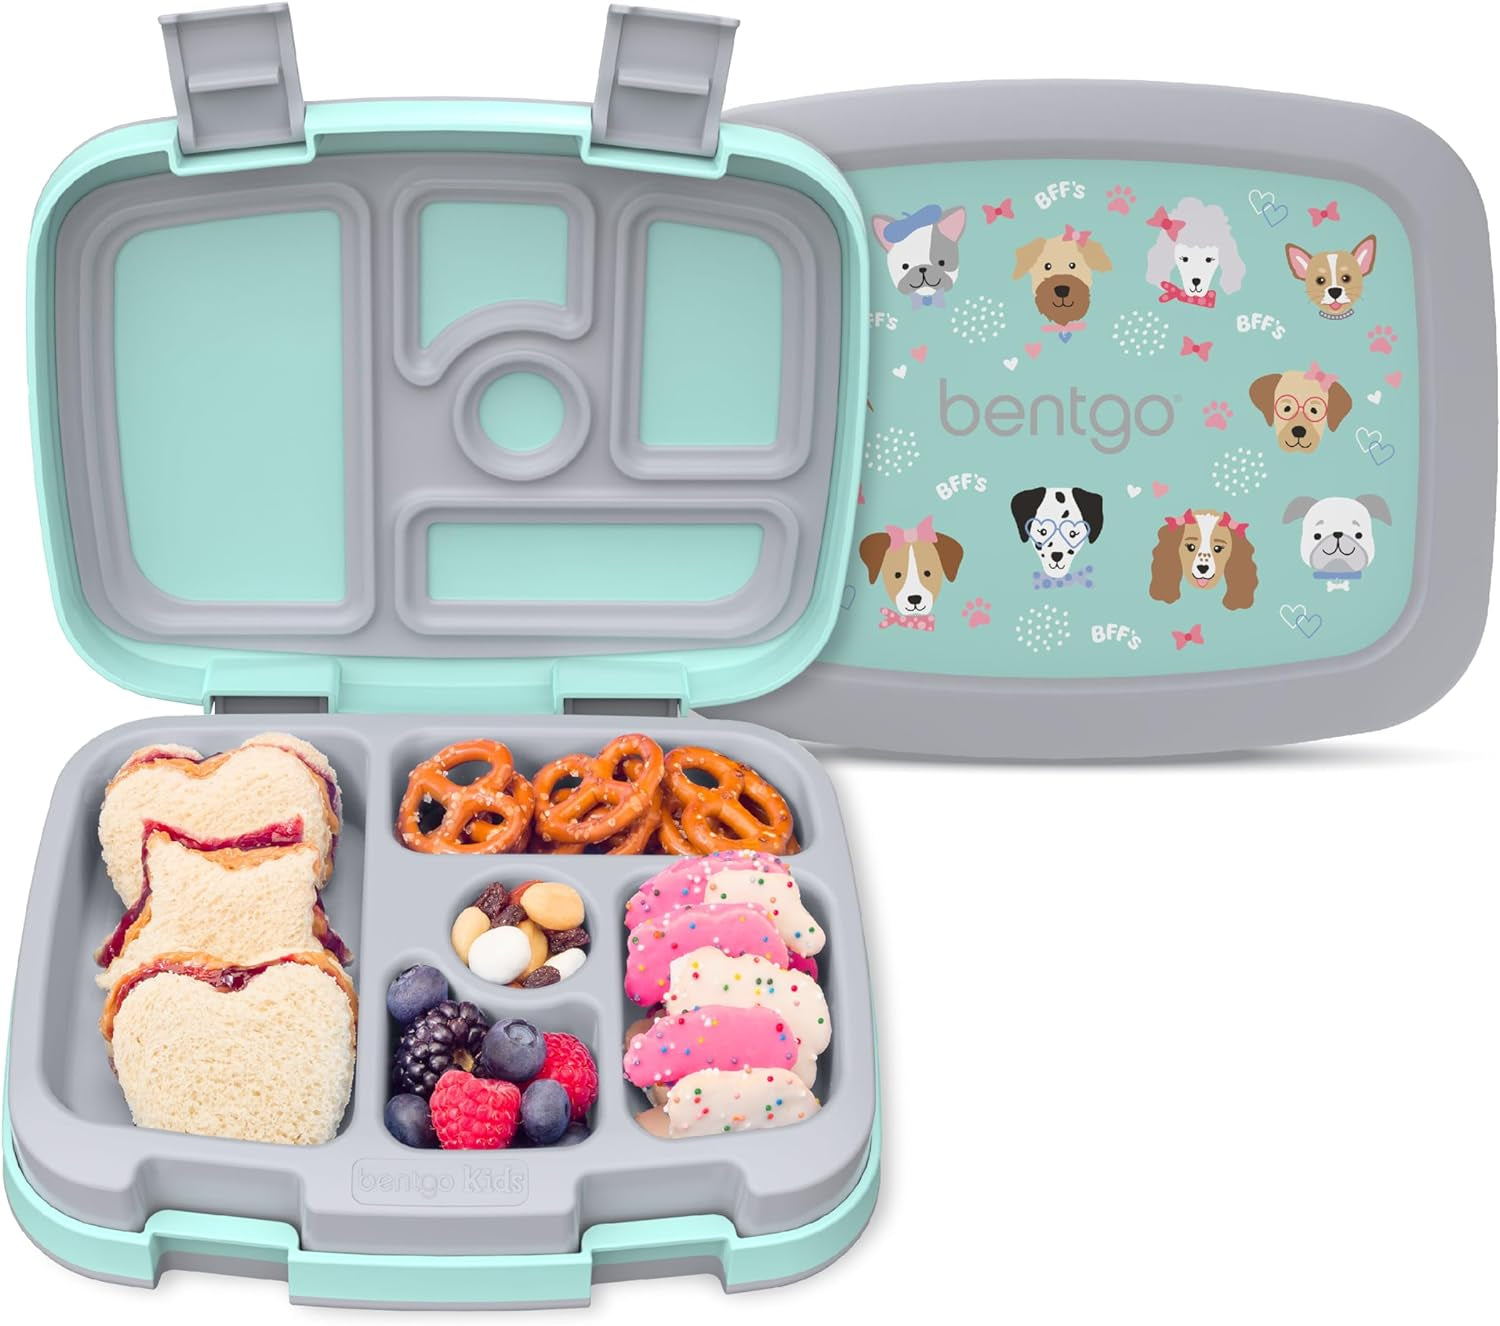 ® Kids Prints Leak-Proof, 5-Compartment Bento-Style Kids Lunch Box - Ideal Portion Sizes for Ages 3-7, Durable, Drop-Proof, Dishwasher Safe, & Made with Bpa-Free Materials (Dinosaur)